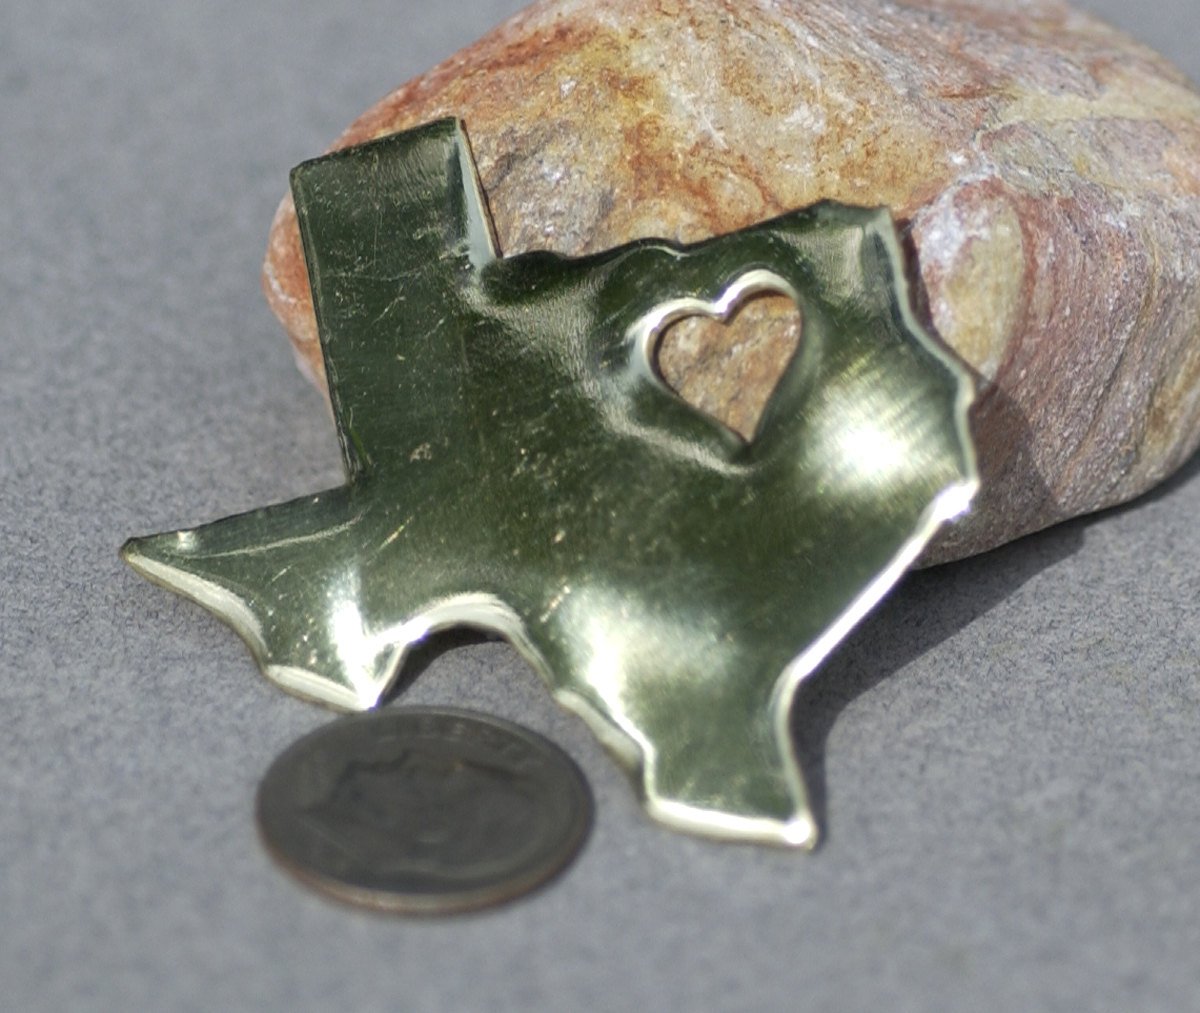 Texas State with Heart Perfect Cute Blanks Cutout for Metalworking Stamping Texturing Blank Variety of Metals - 4 pieces